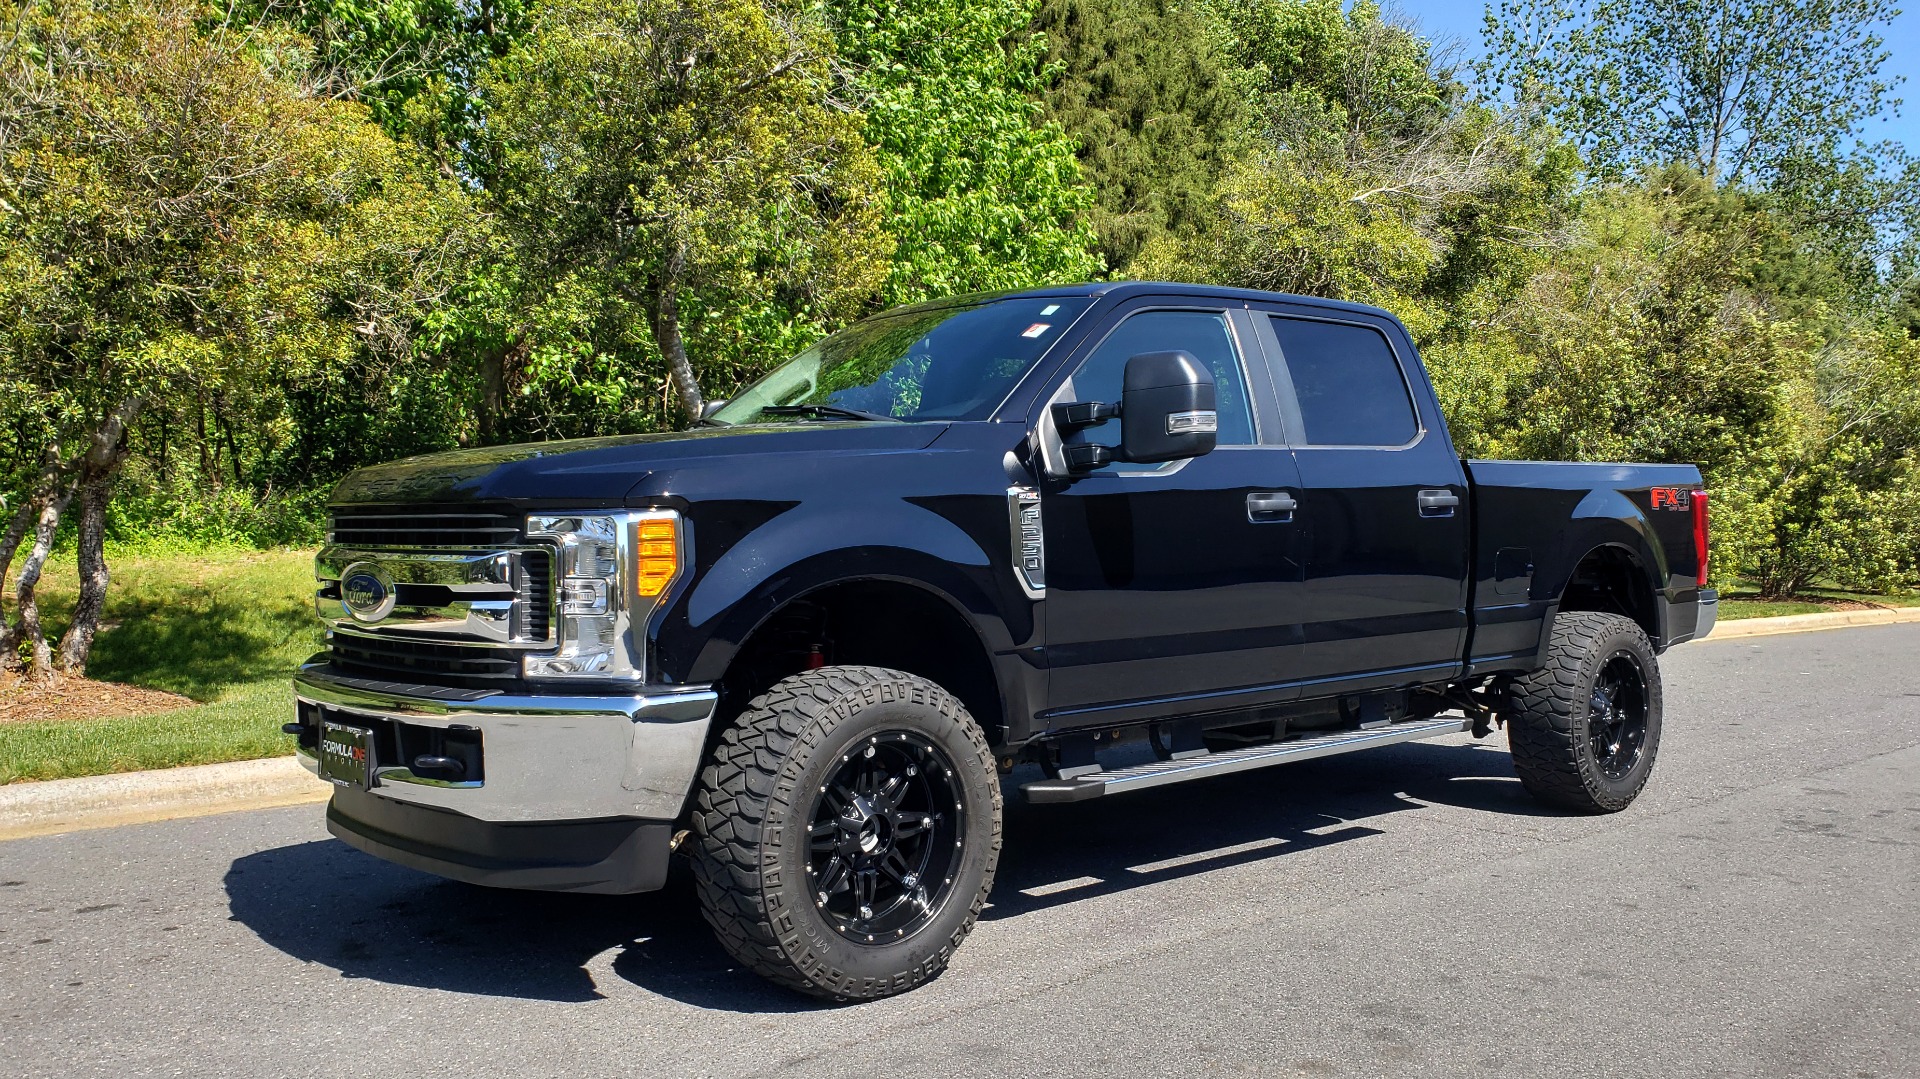 Used 2017 Ford SUPERDUTY F-250 SRW XL 4X4 / 160 WB / 6.2L EFI V8 / 6-SPD AUTO / 6'8 BED for sale Sold at Formula Imports in Charlotte NC 28227 1